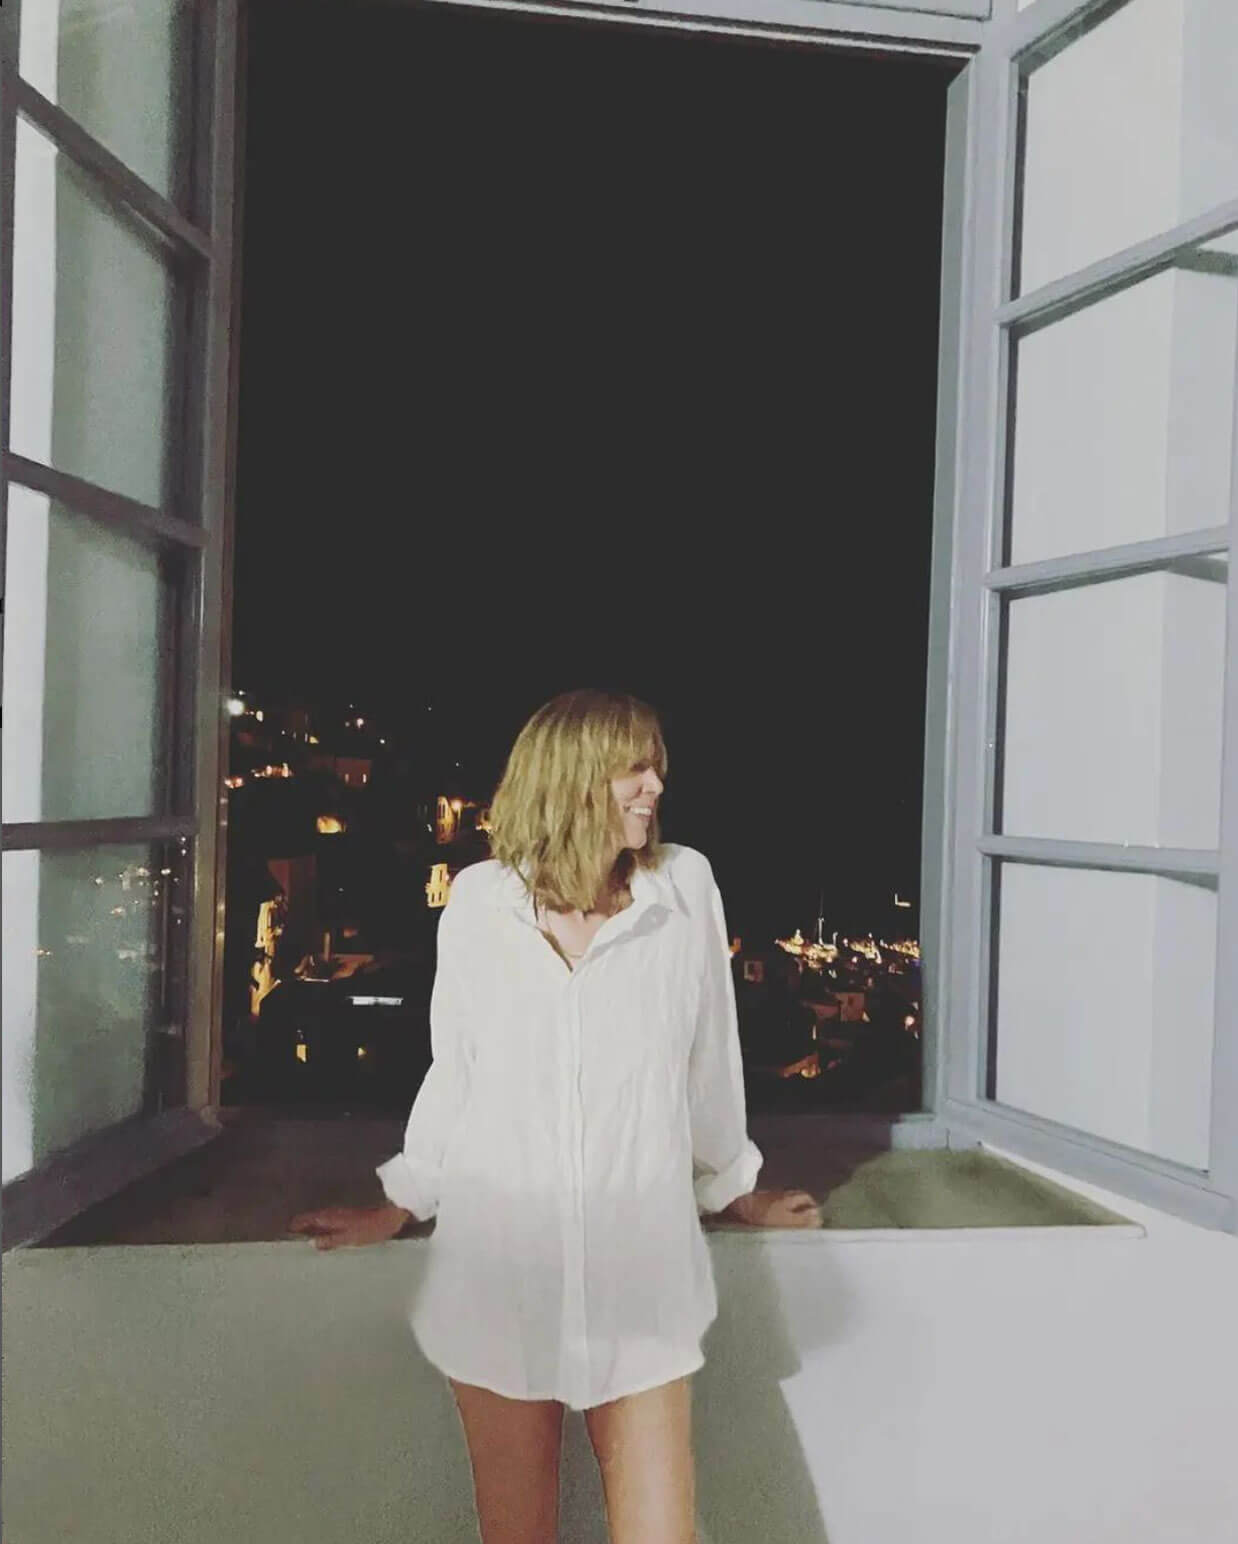 Beth Orton at the Old Carpet Factory Recording Studio on Hydra Island in Greece